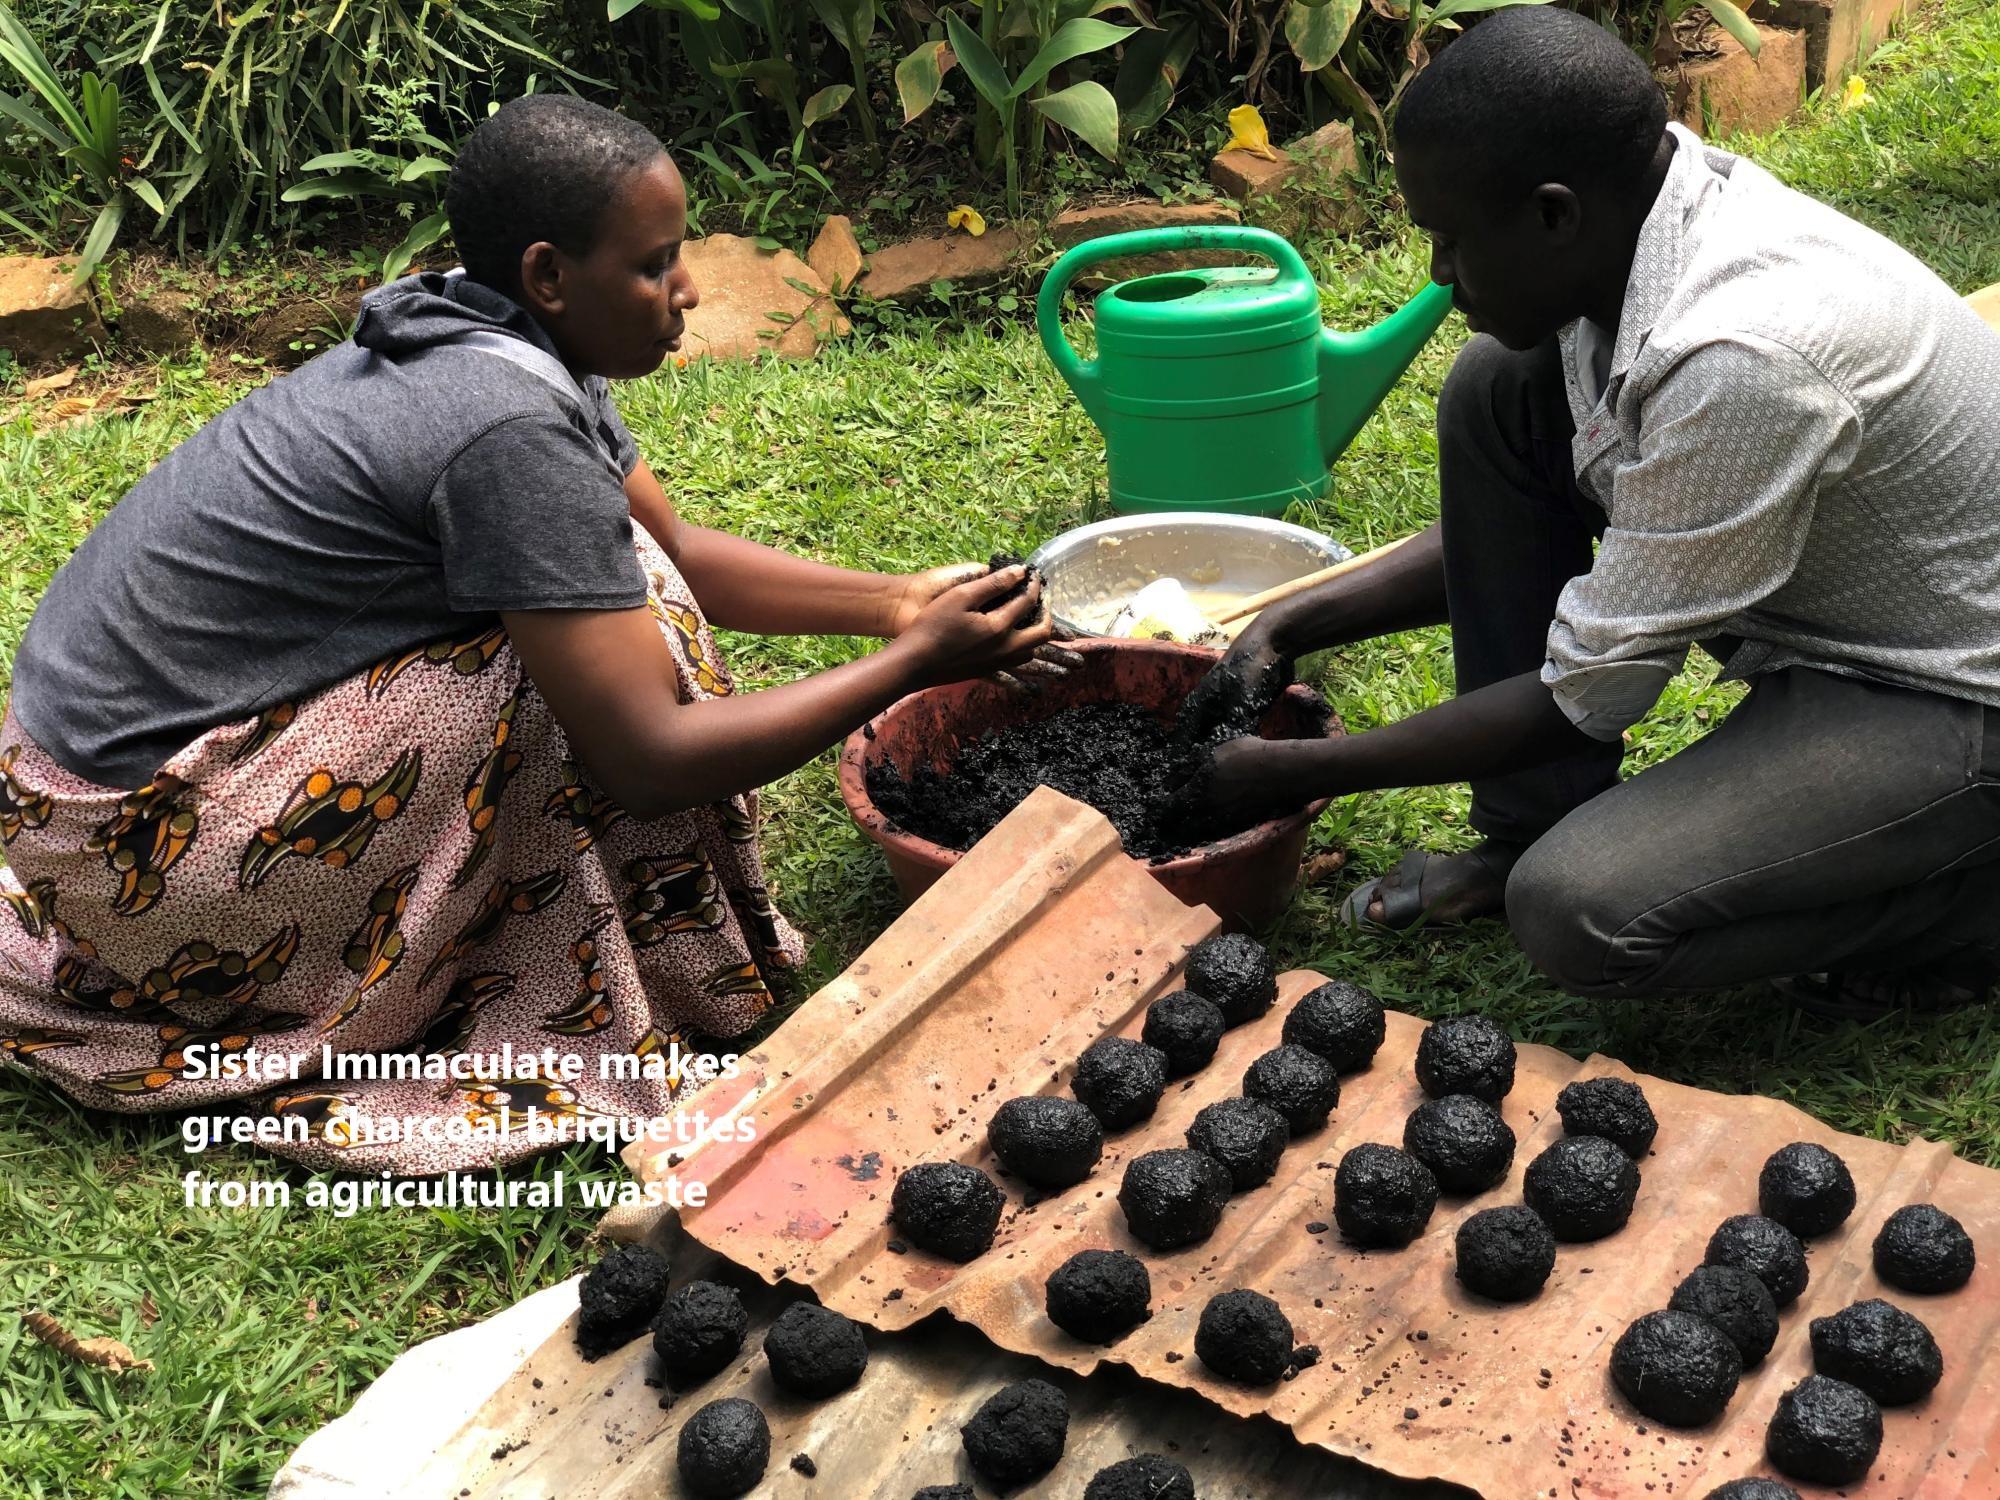 Sister Immaculate makes green charcoal briquettes from agricultural waste